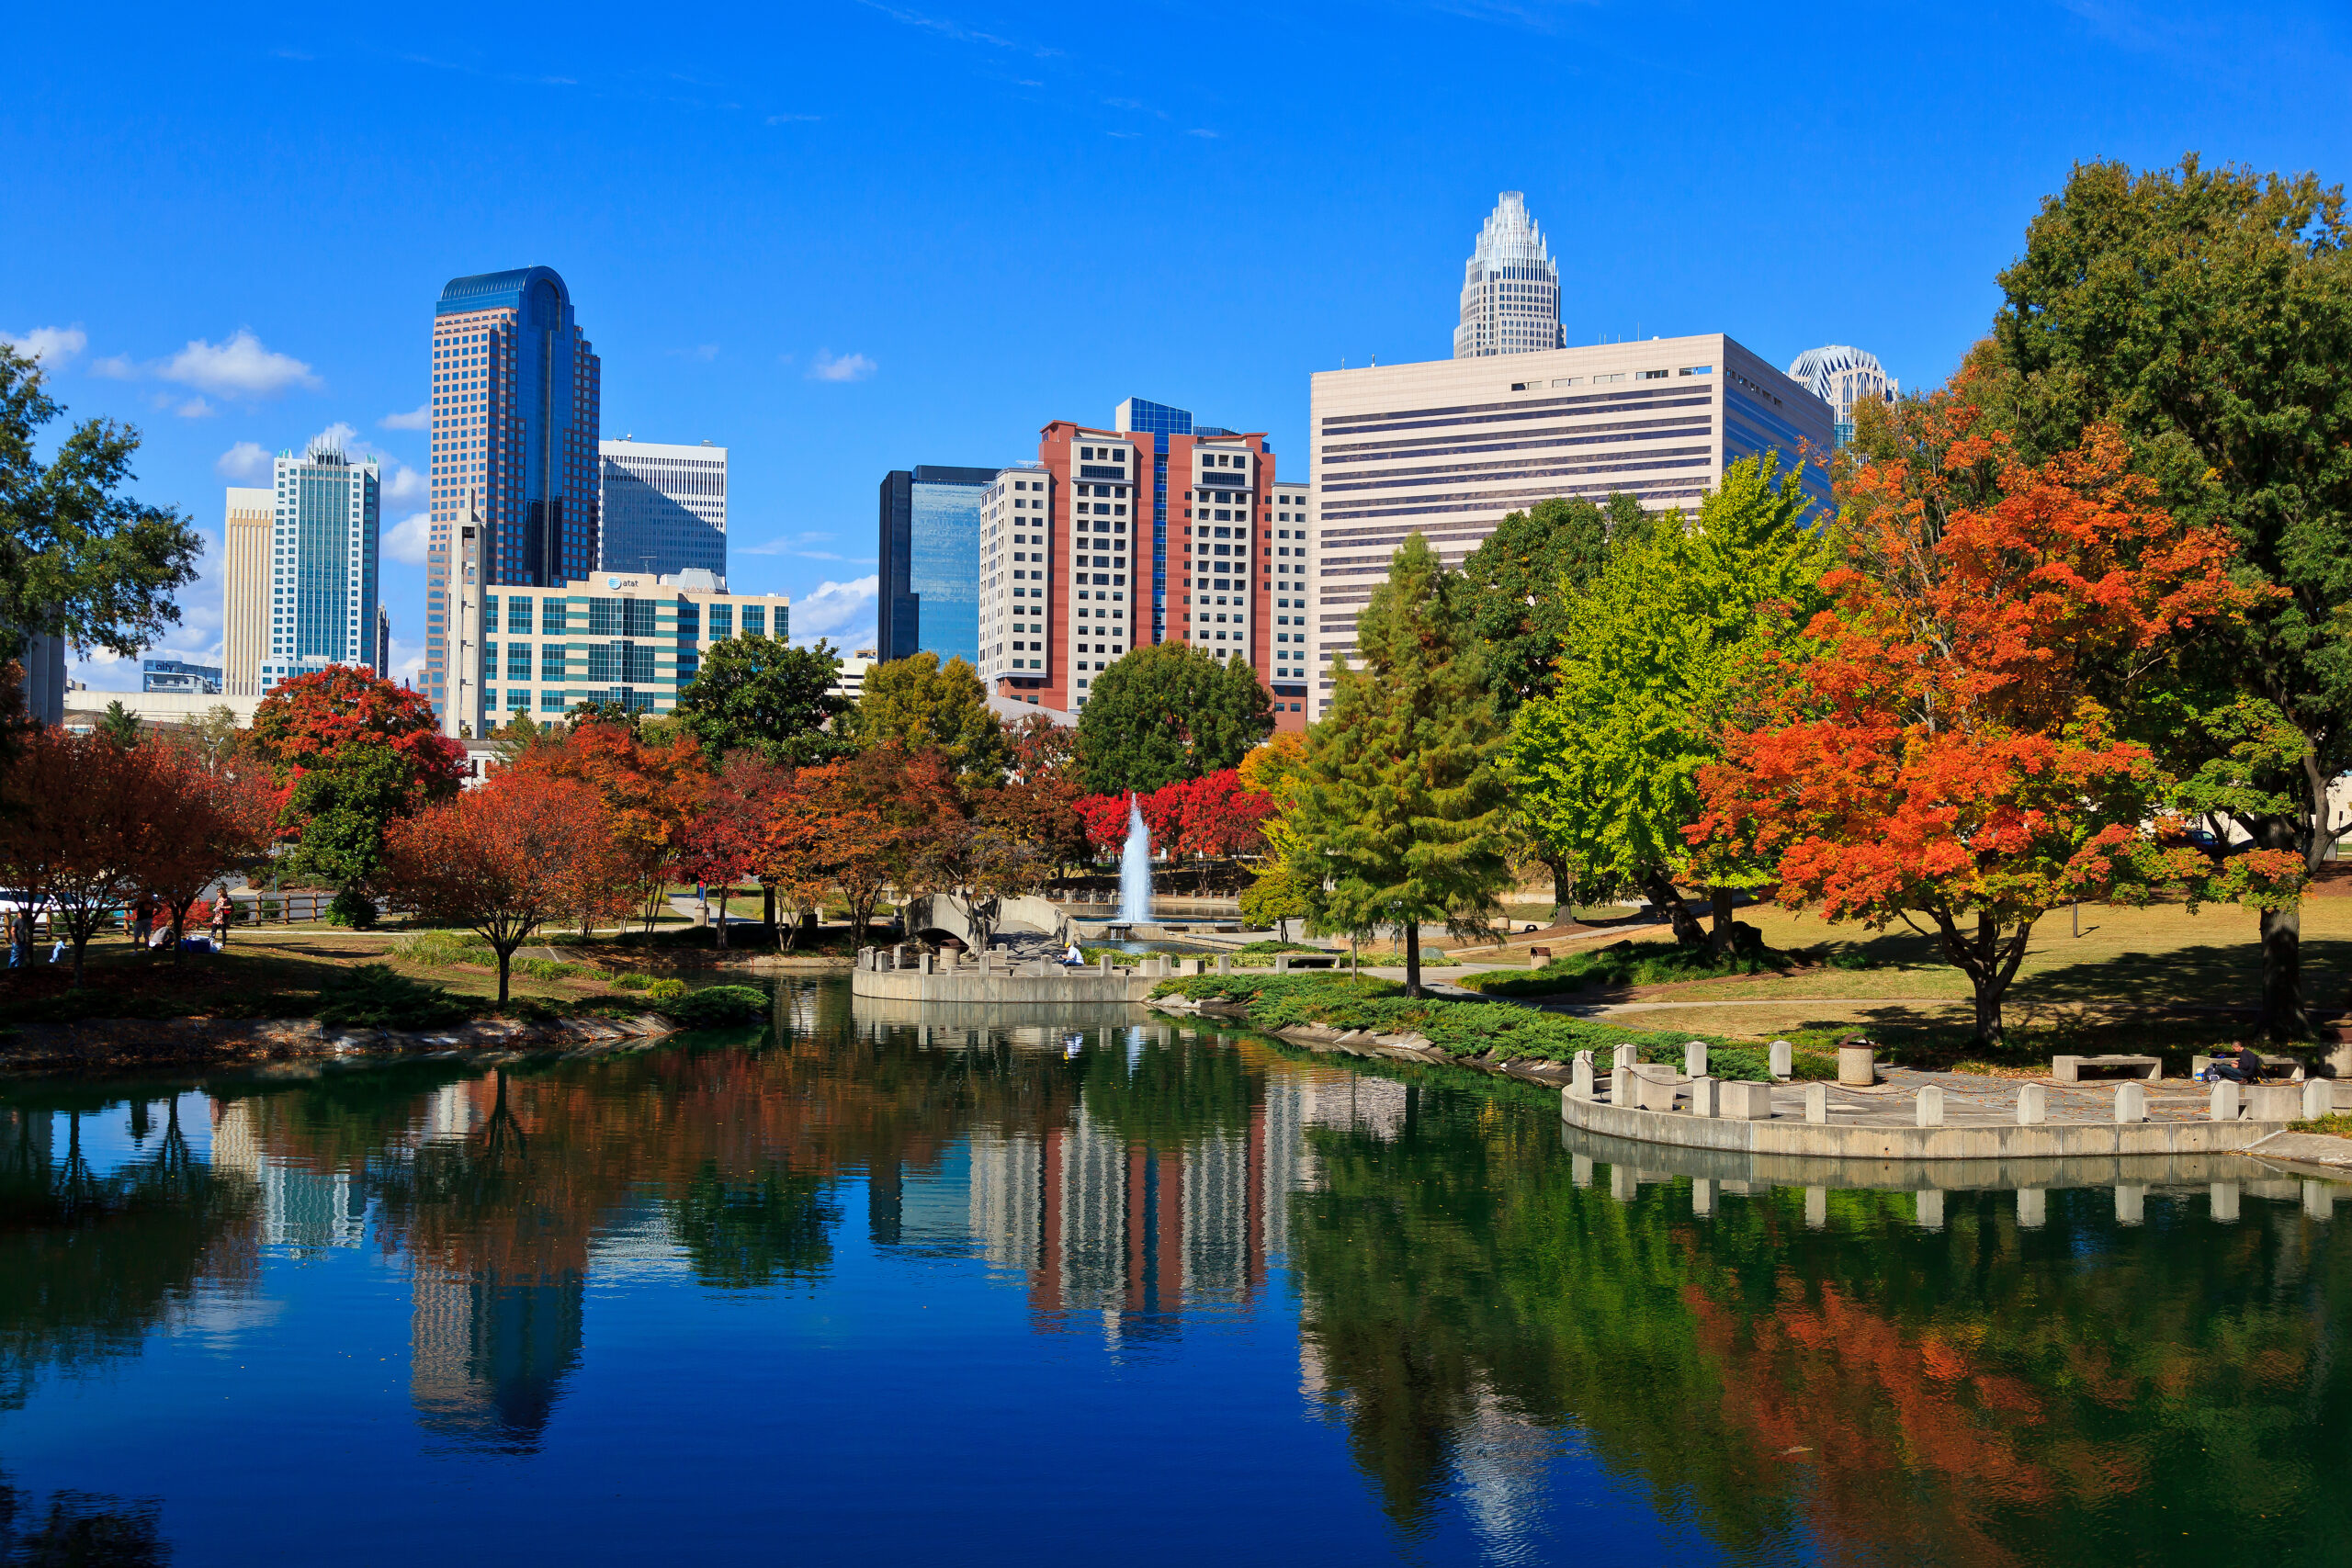 Explore SouthPark in Charlotte - Eat, Drink, Shop, Play In CLT